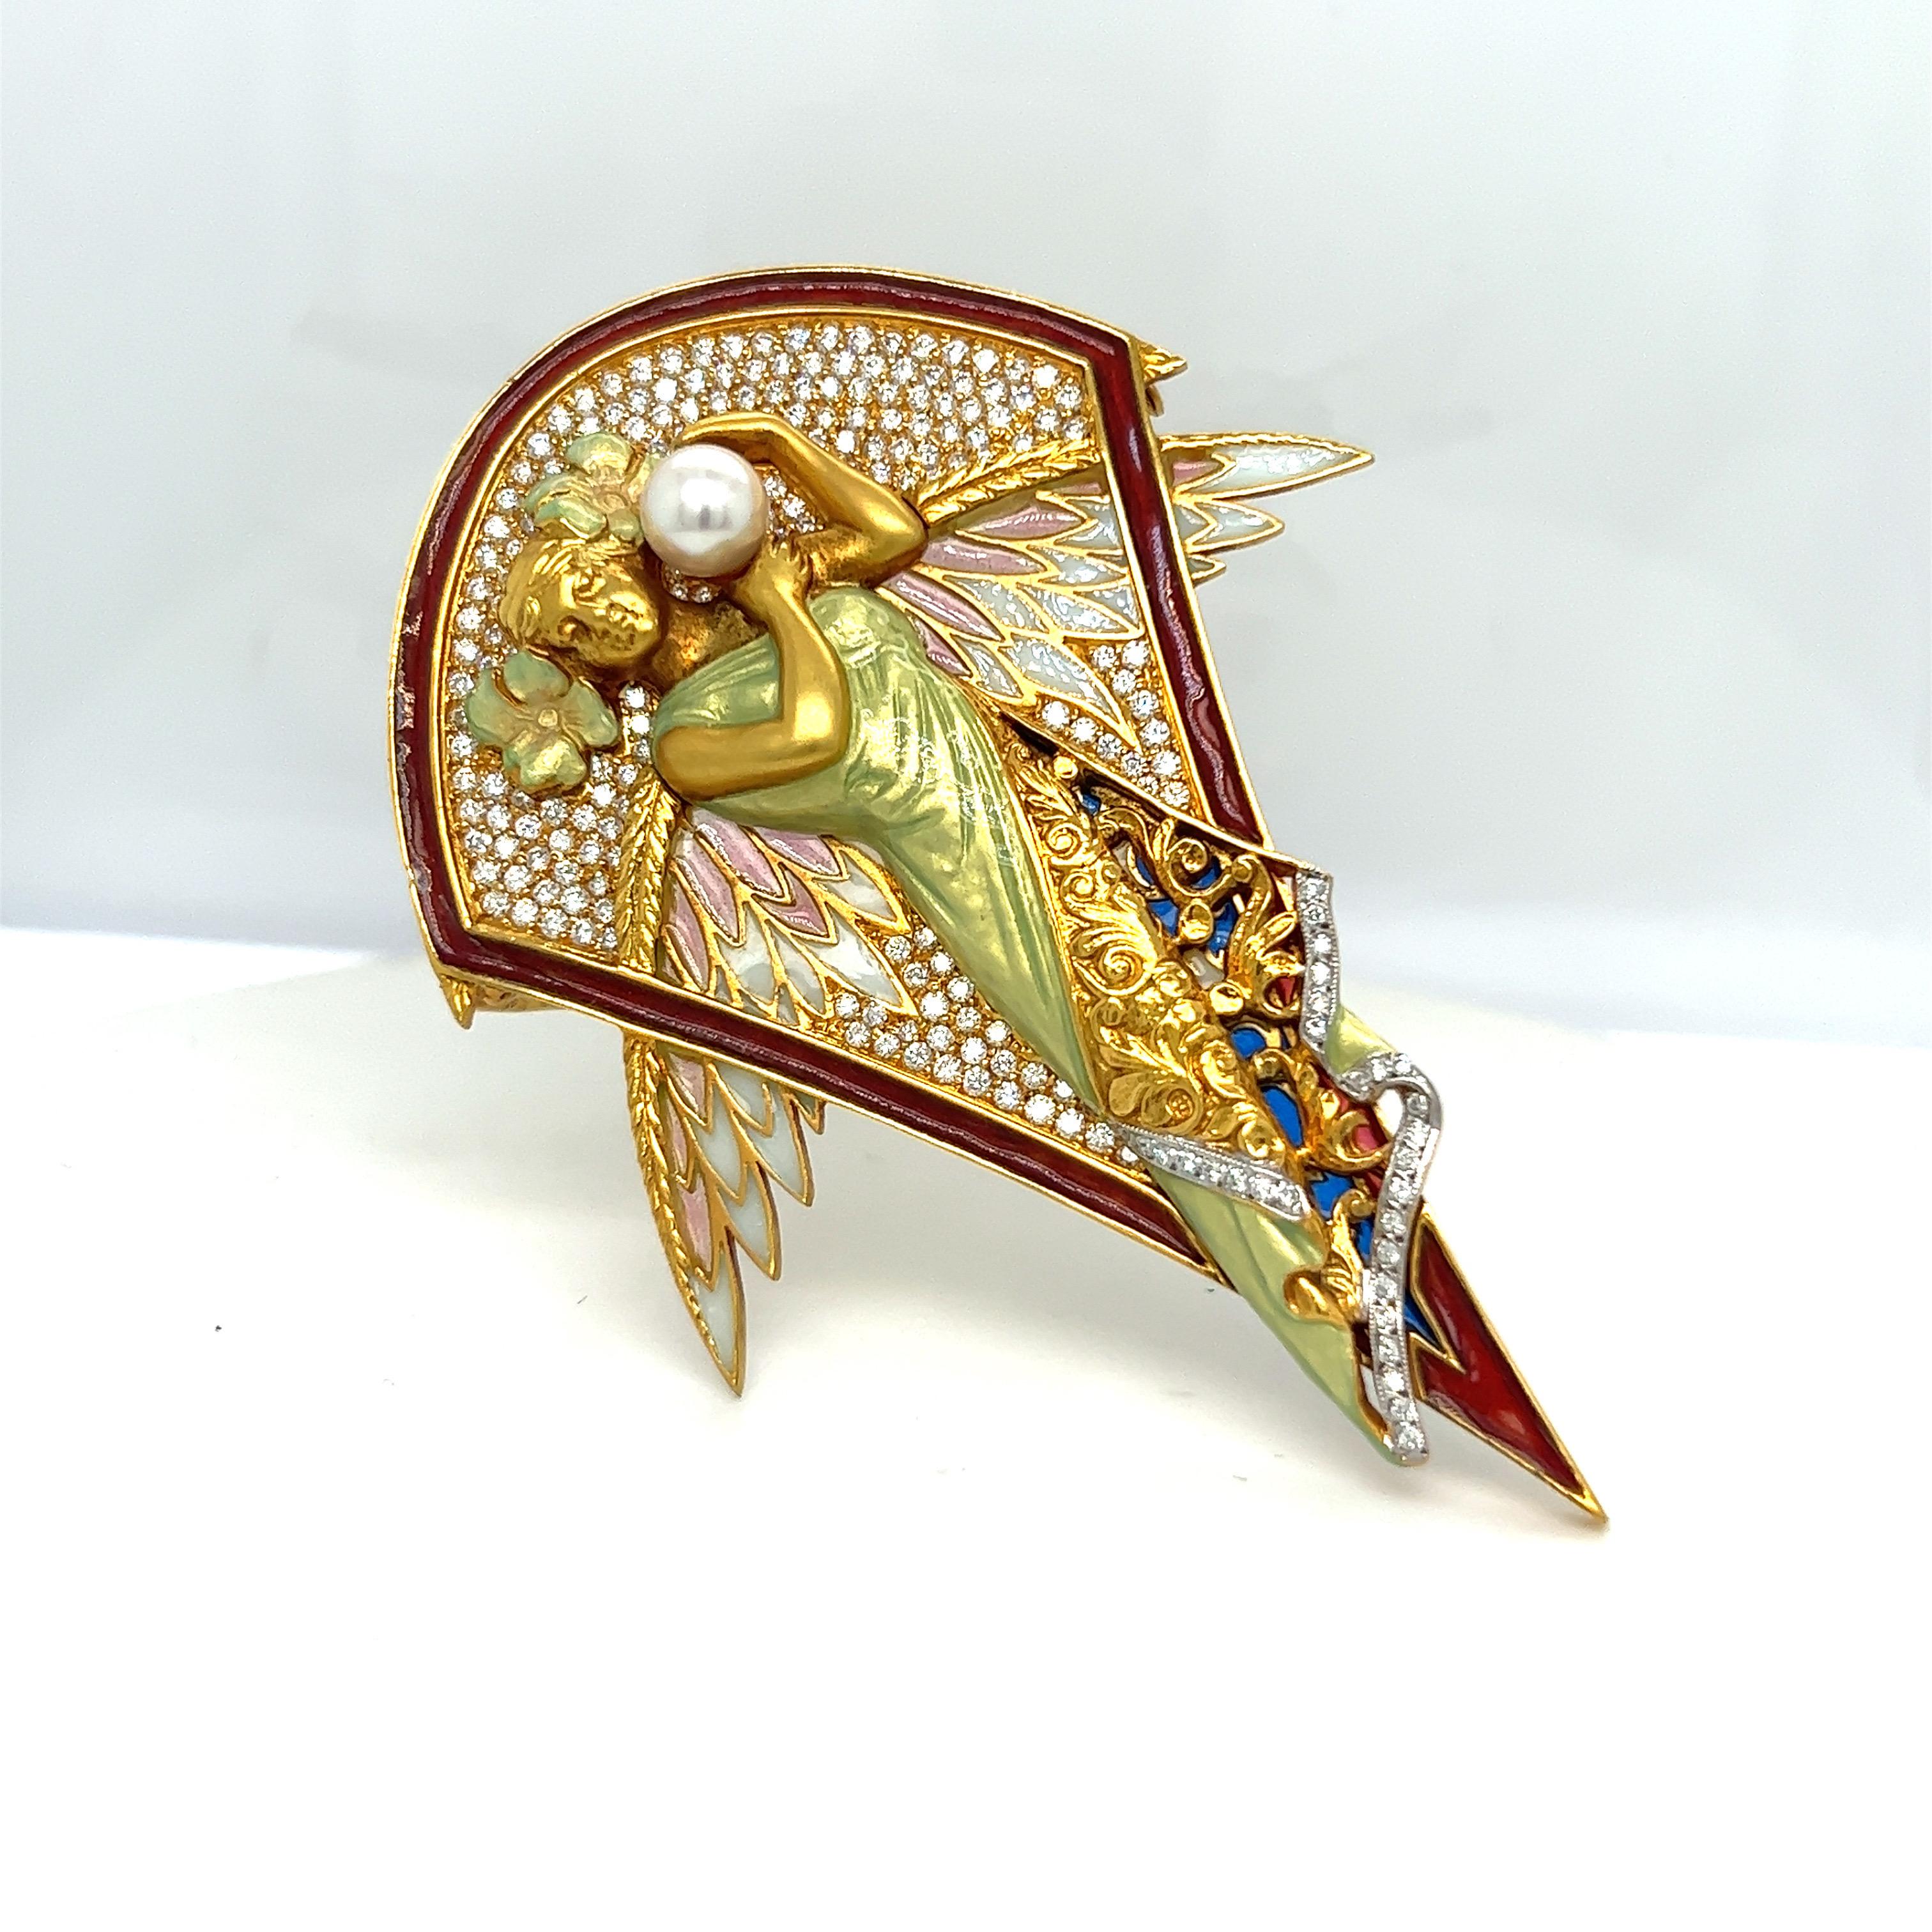 Masriera 18 KT YG Winged Nymph Brooch with Dia 1.94CT, Enamel and Pearls For Sale 3